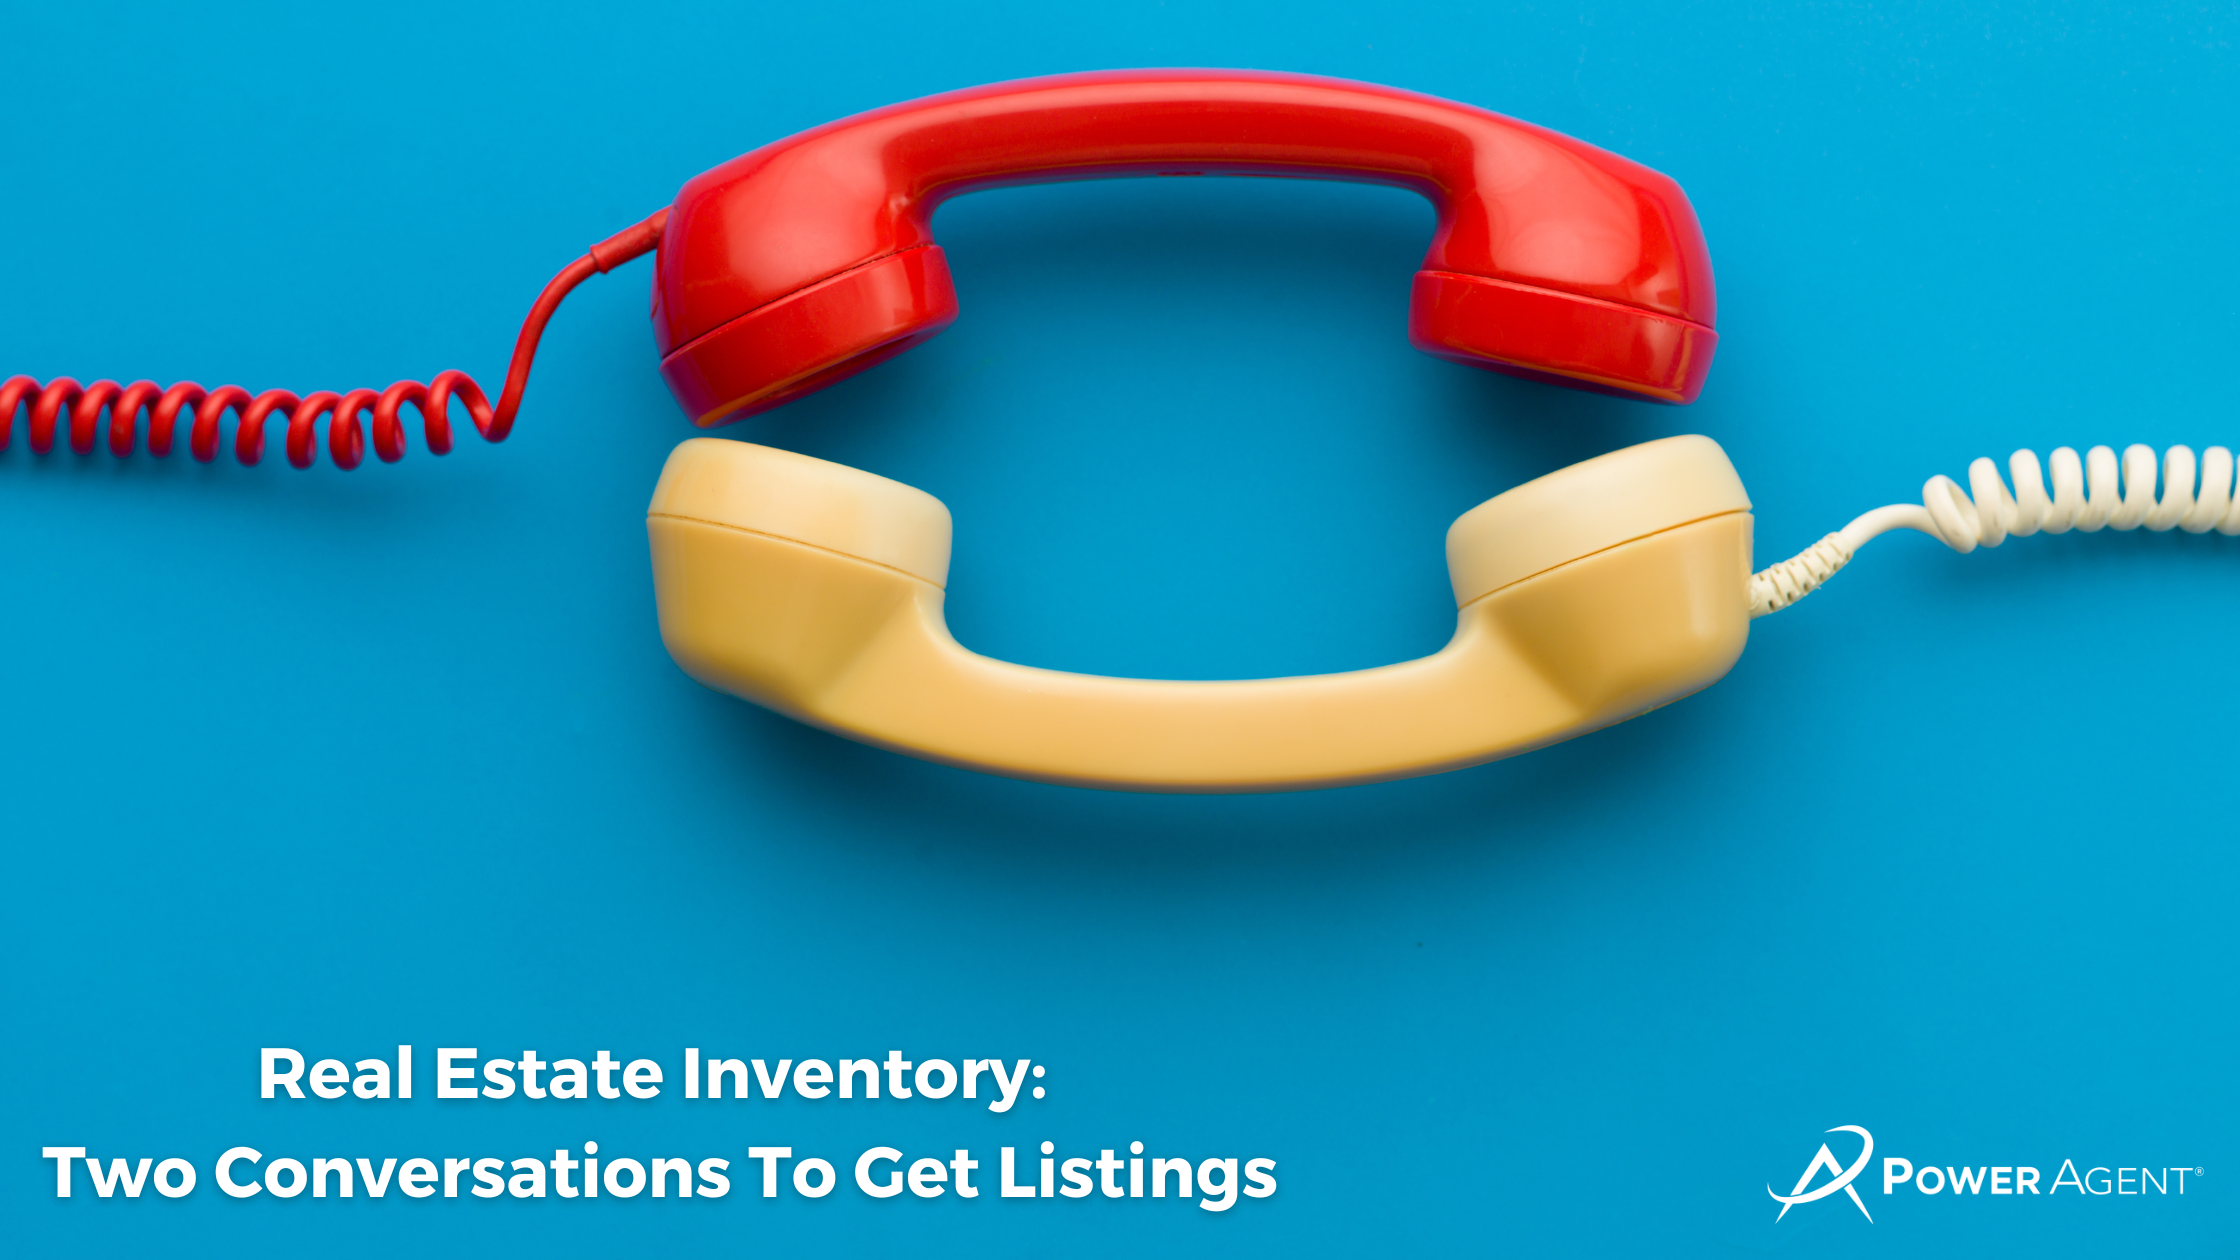 Real Estate Inventory: Two Conversations To Get Listings